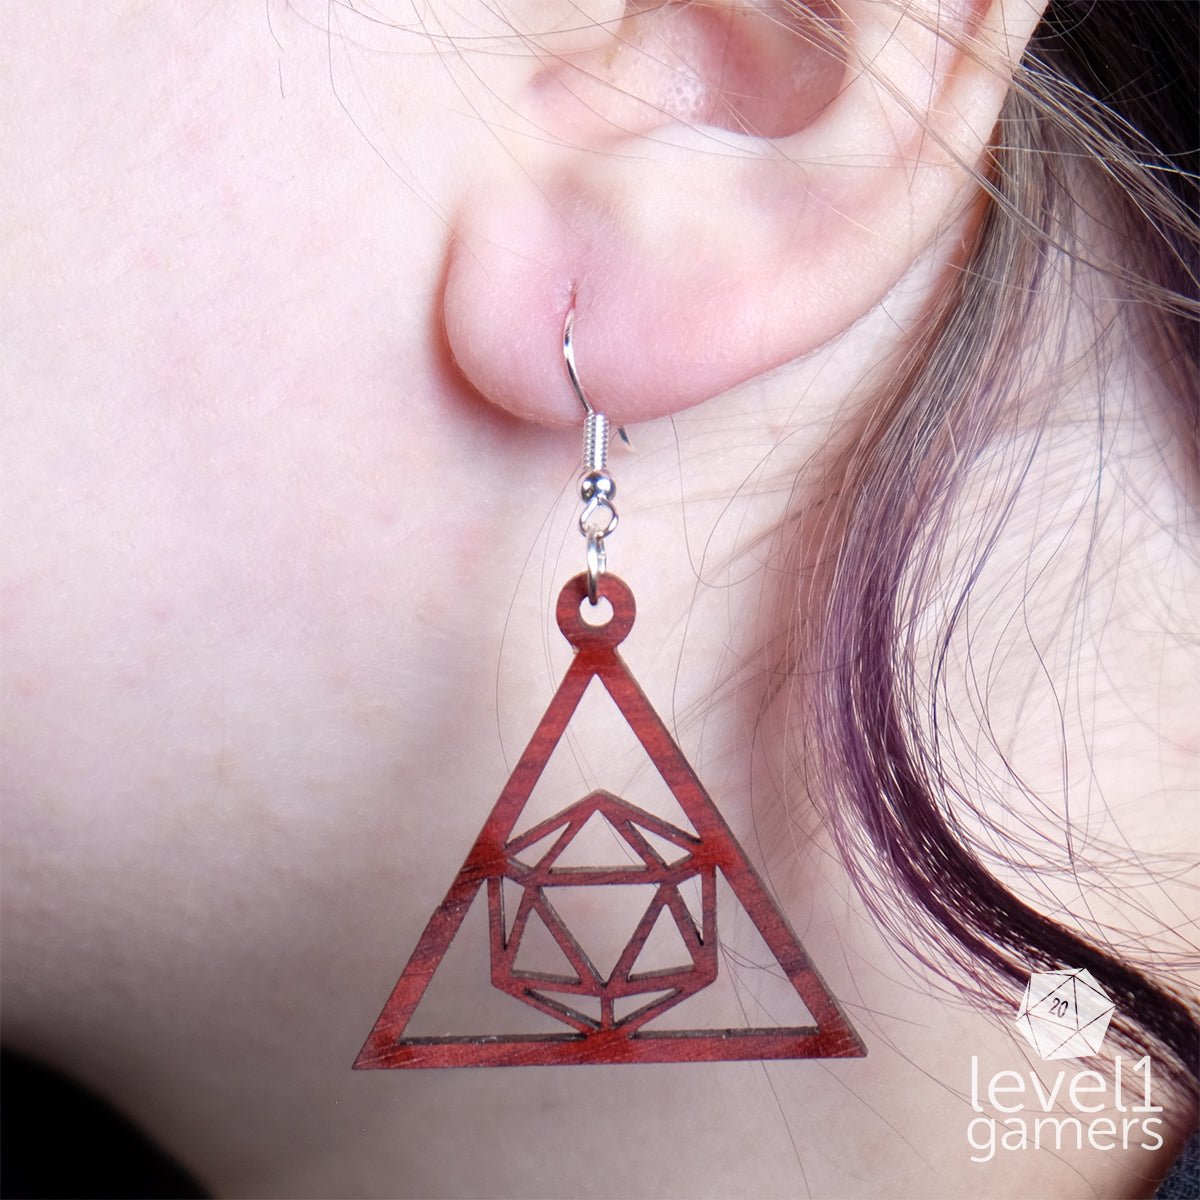 D20 Triangle Earrings  Level 1 Gamers   